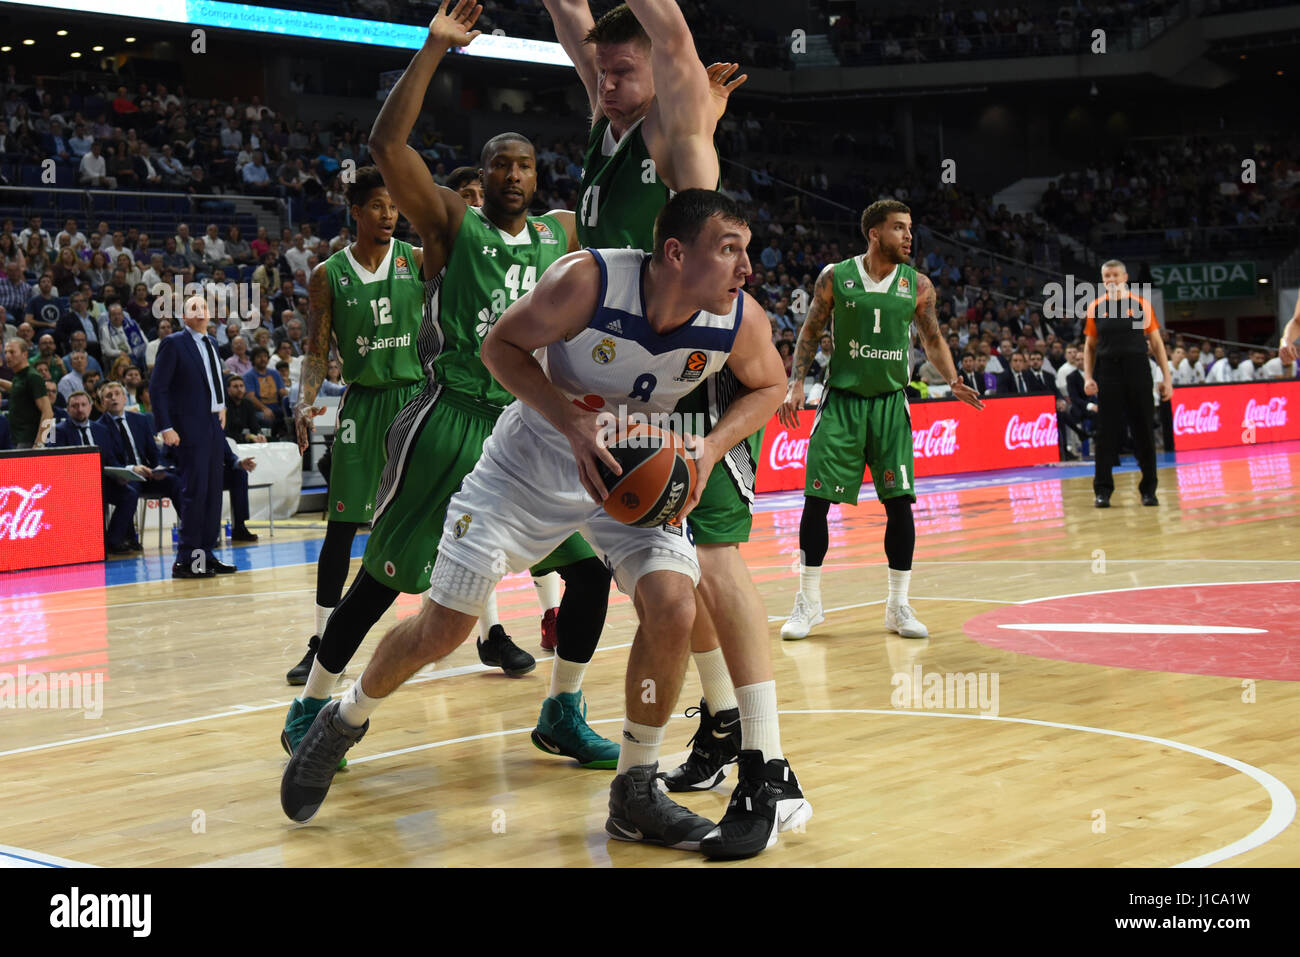 Jonas Maciulis (center) #8 of Real Madrid in action during the Euroleague basketball first quarter-final match between Real Madrid and Darussafaka Dogus at WiZink center in Madrid. (Photo by: Jorge Sanz/Pacific Press) Stock Photo